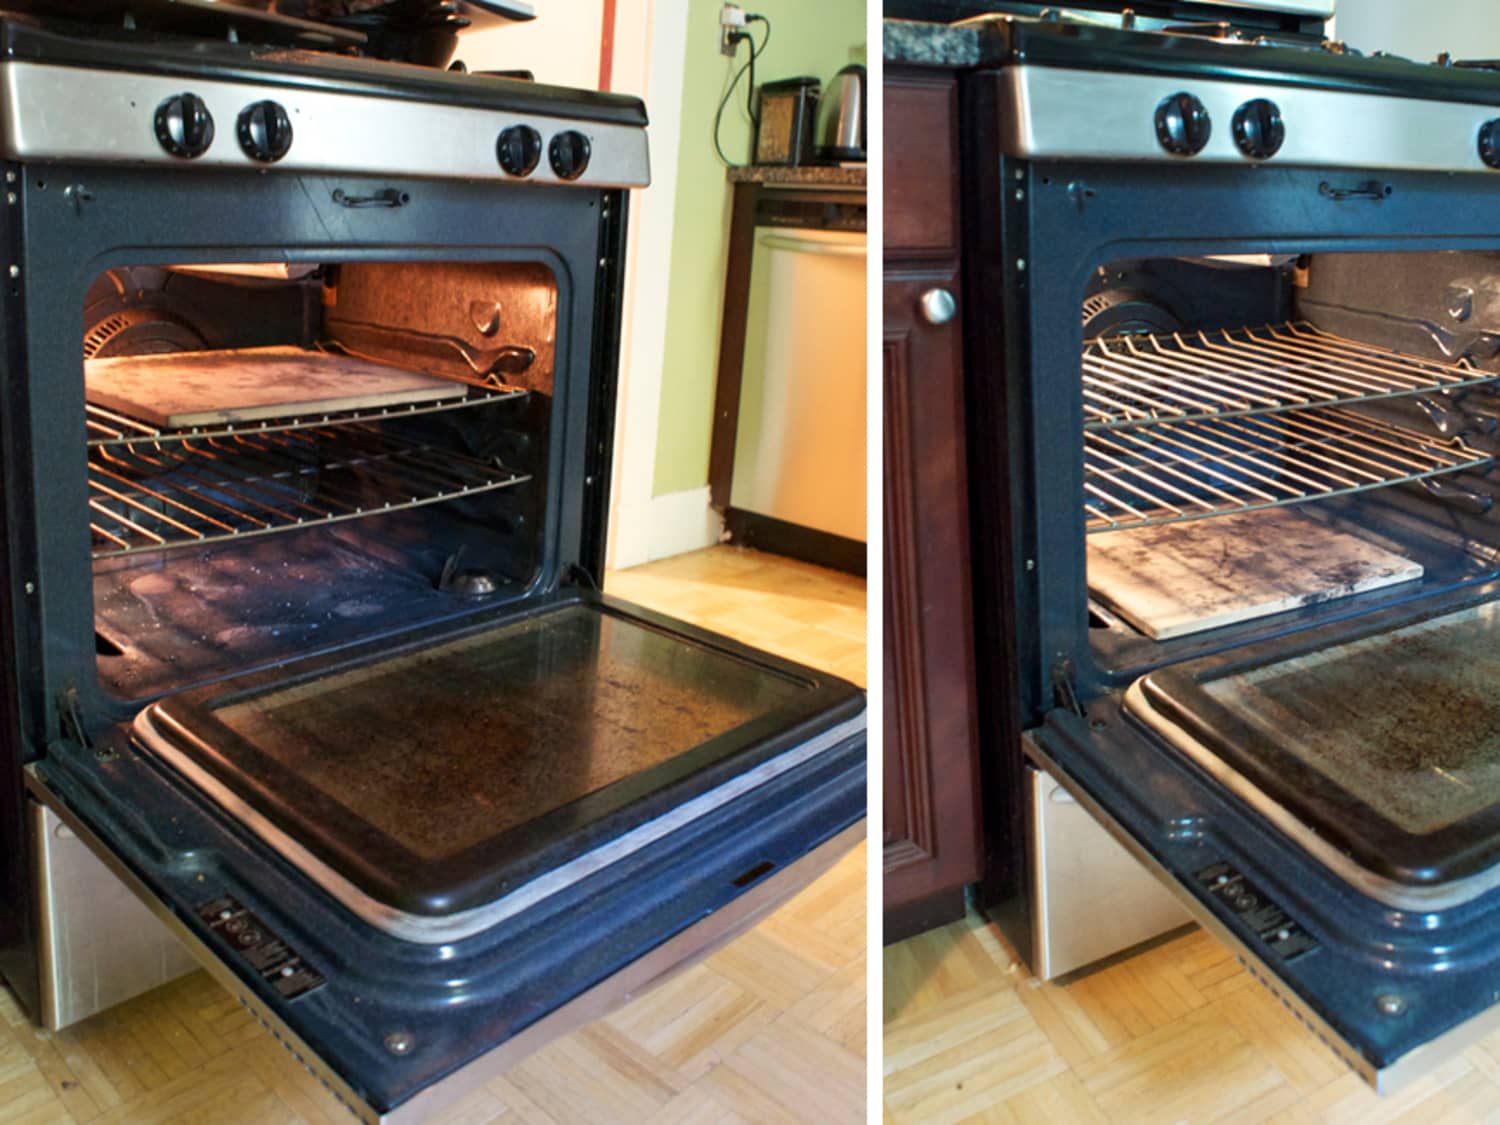 5 Proven Ways to Clean a Dirty Oven, According to Professional Chefs